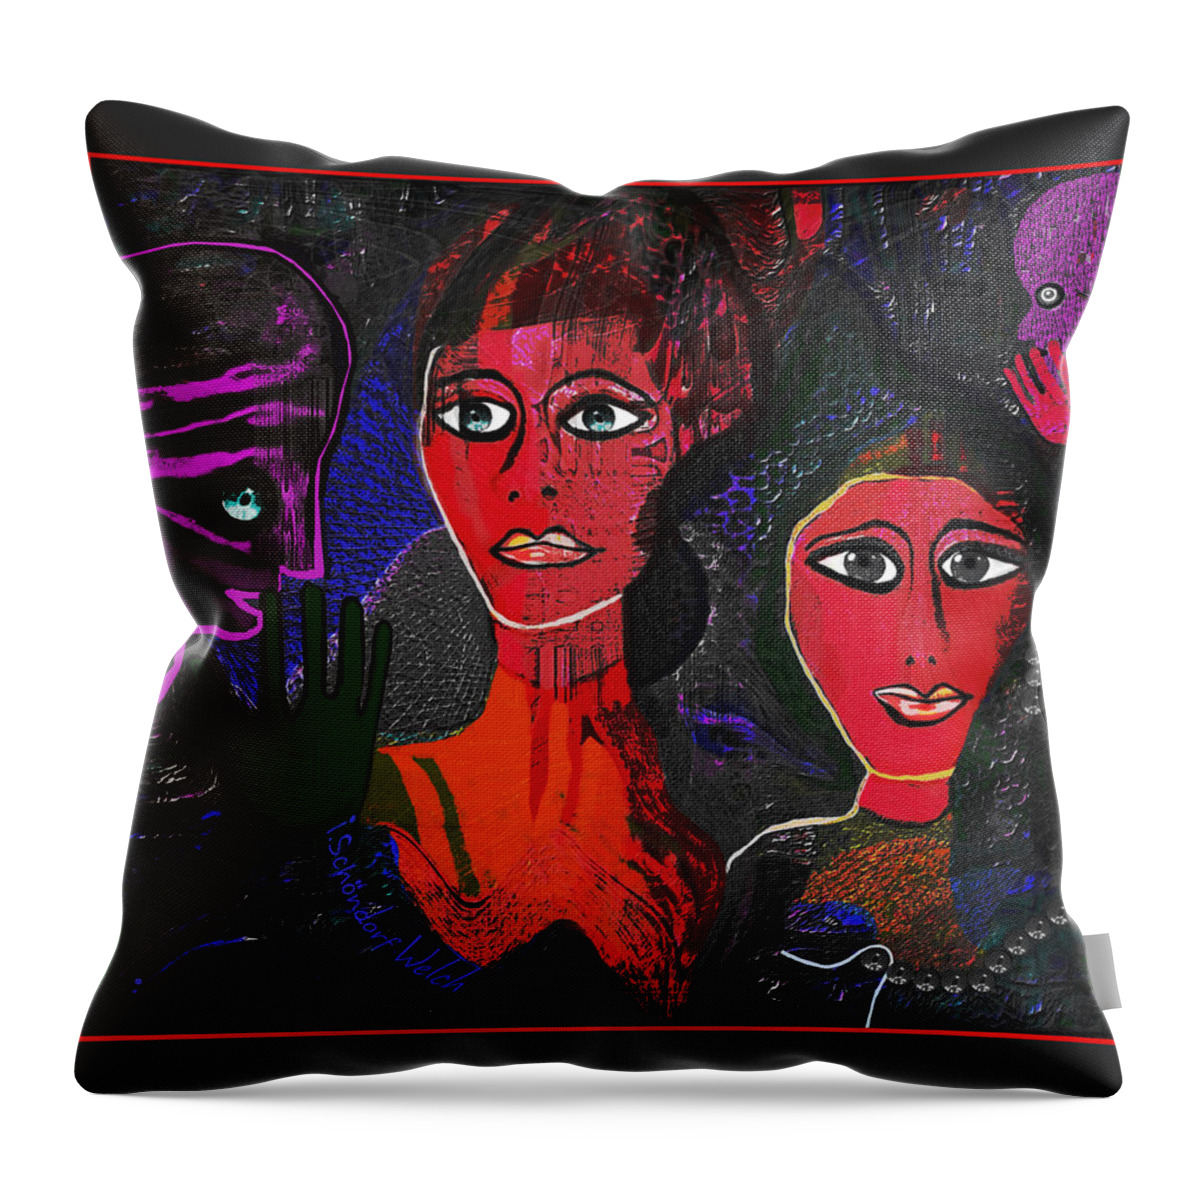 1977 - Faces Red Throw Pillow featuring the digital art 1977 - Faces Red by Irmgard Schoendorf Welch